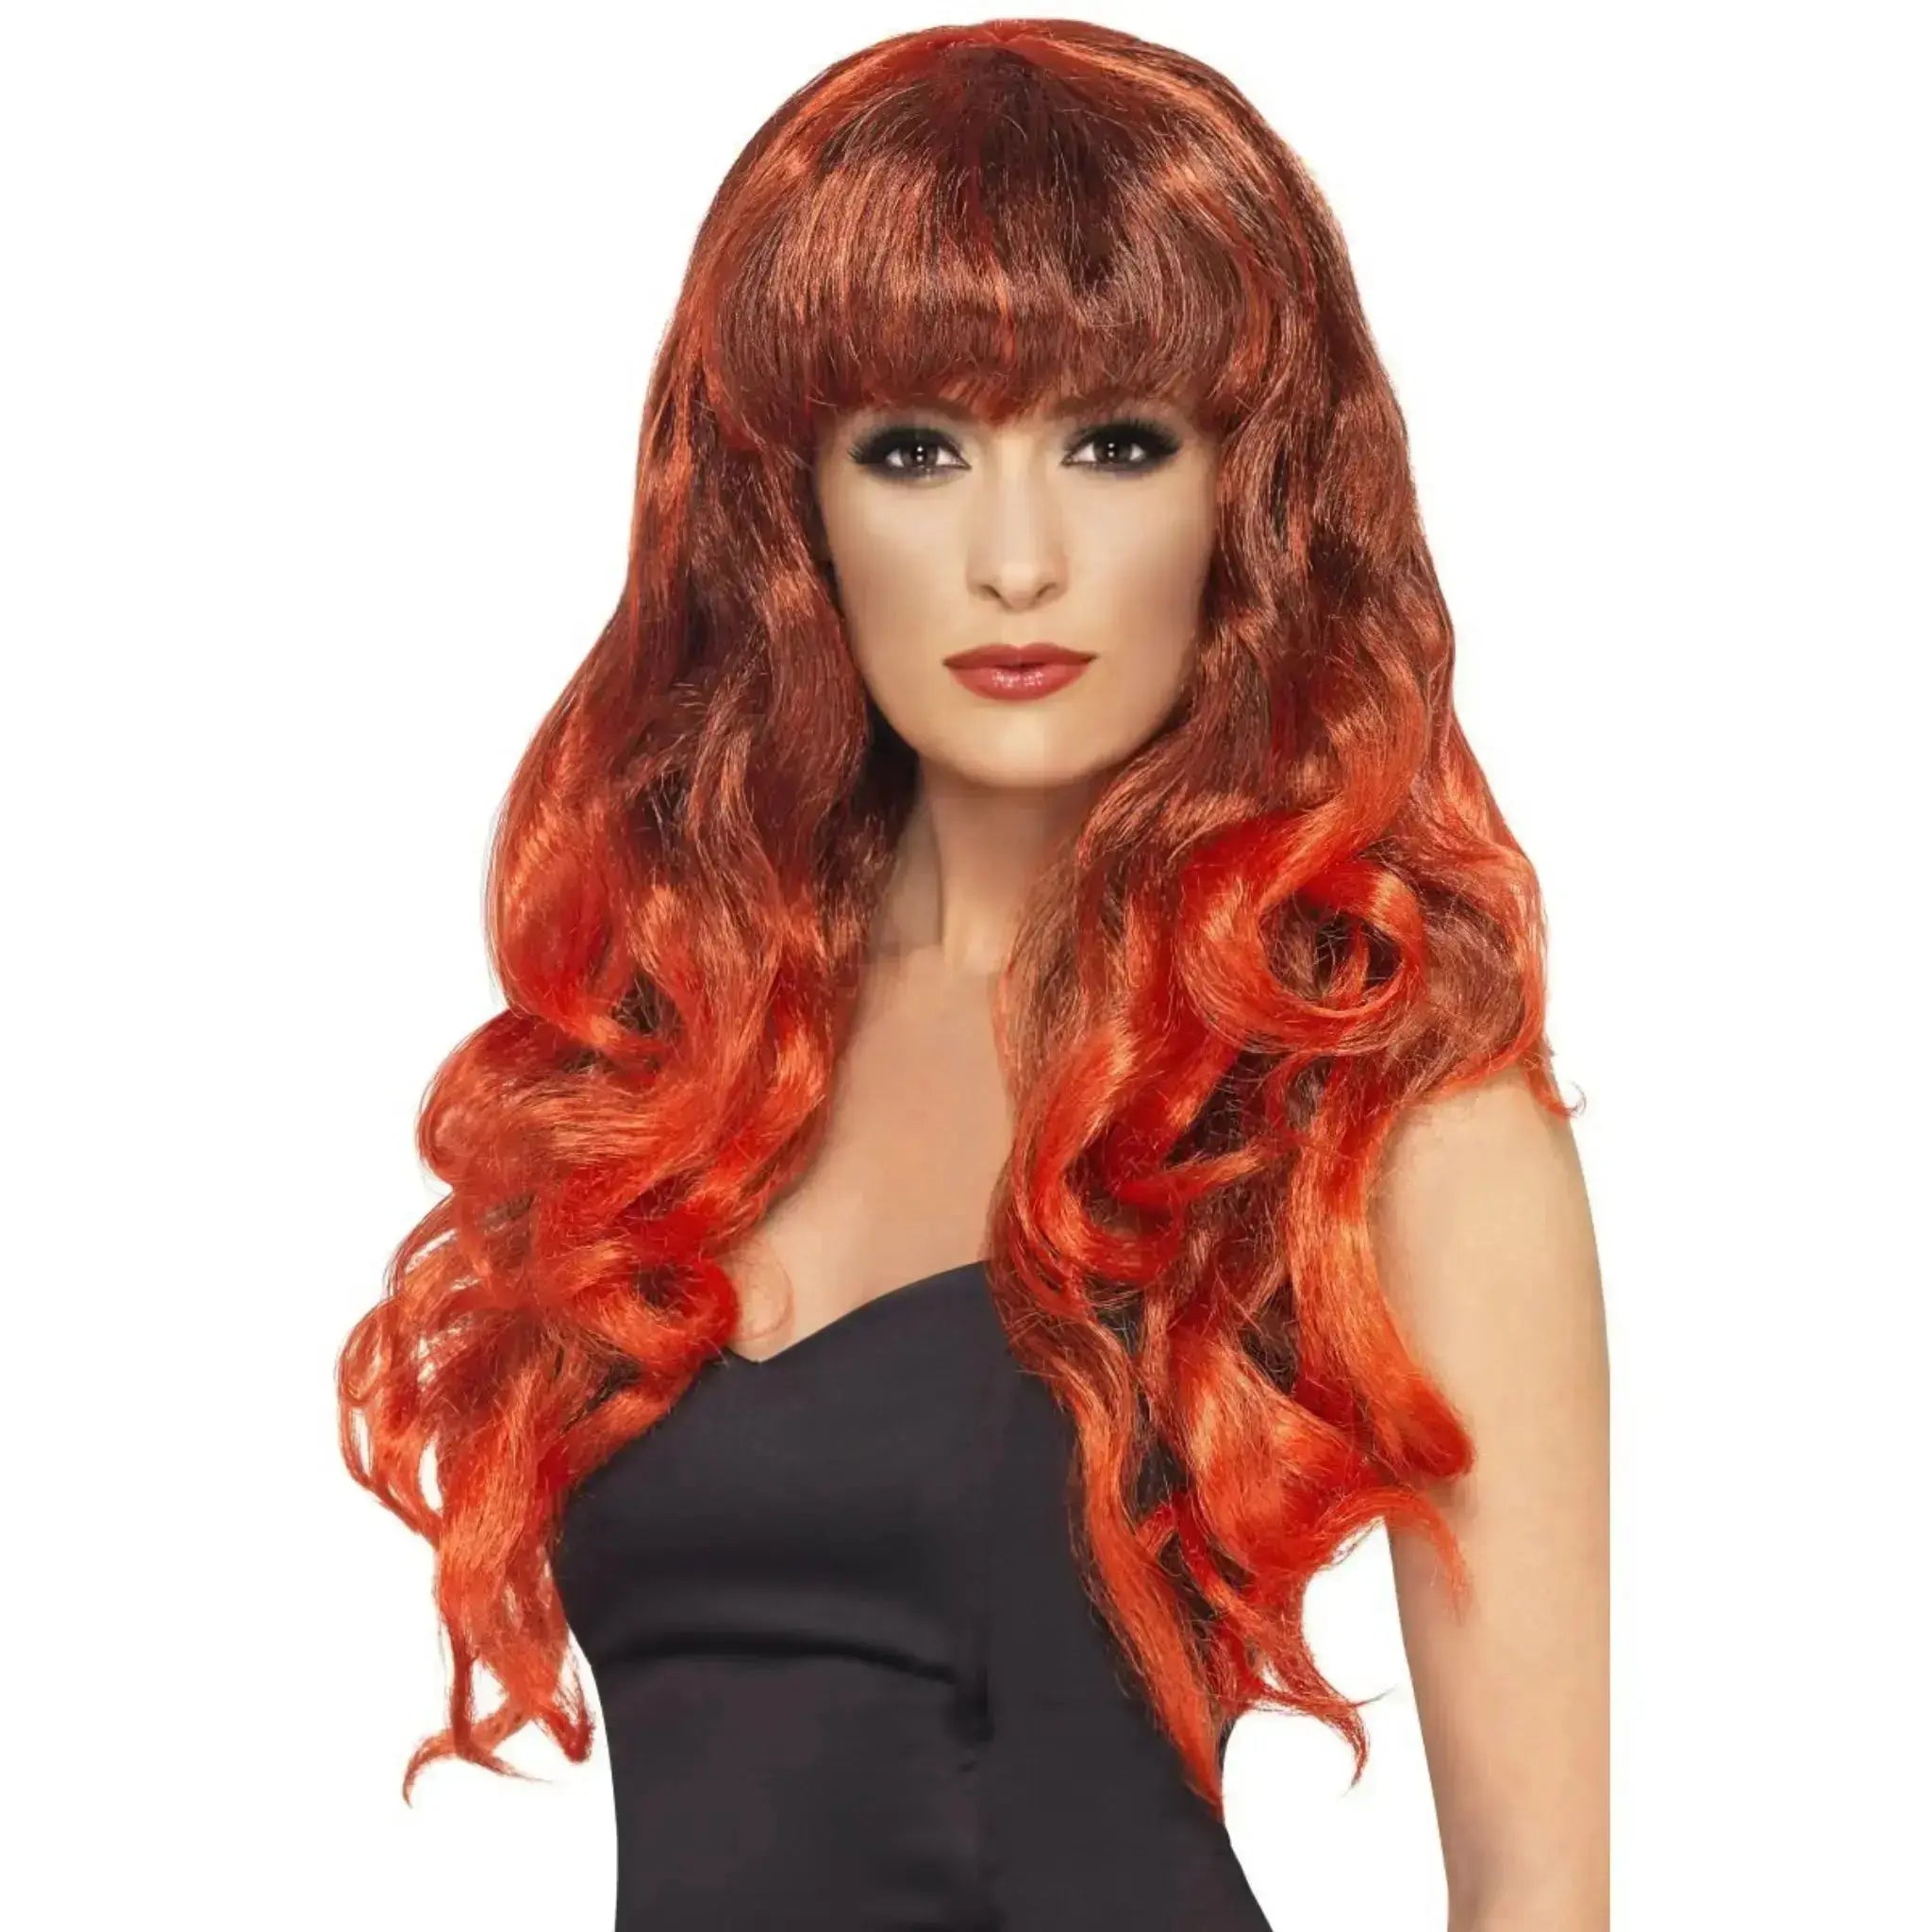 Siren Wigs | The Party Hut